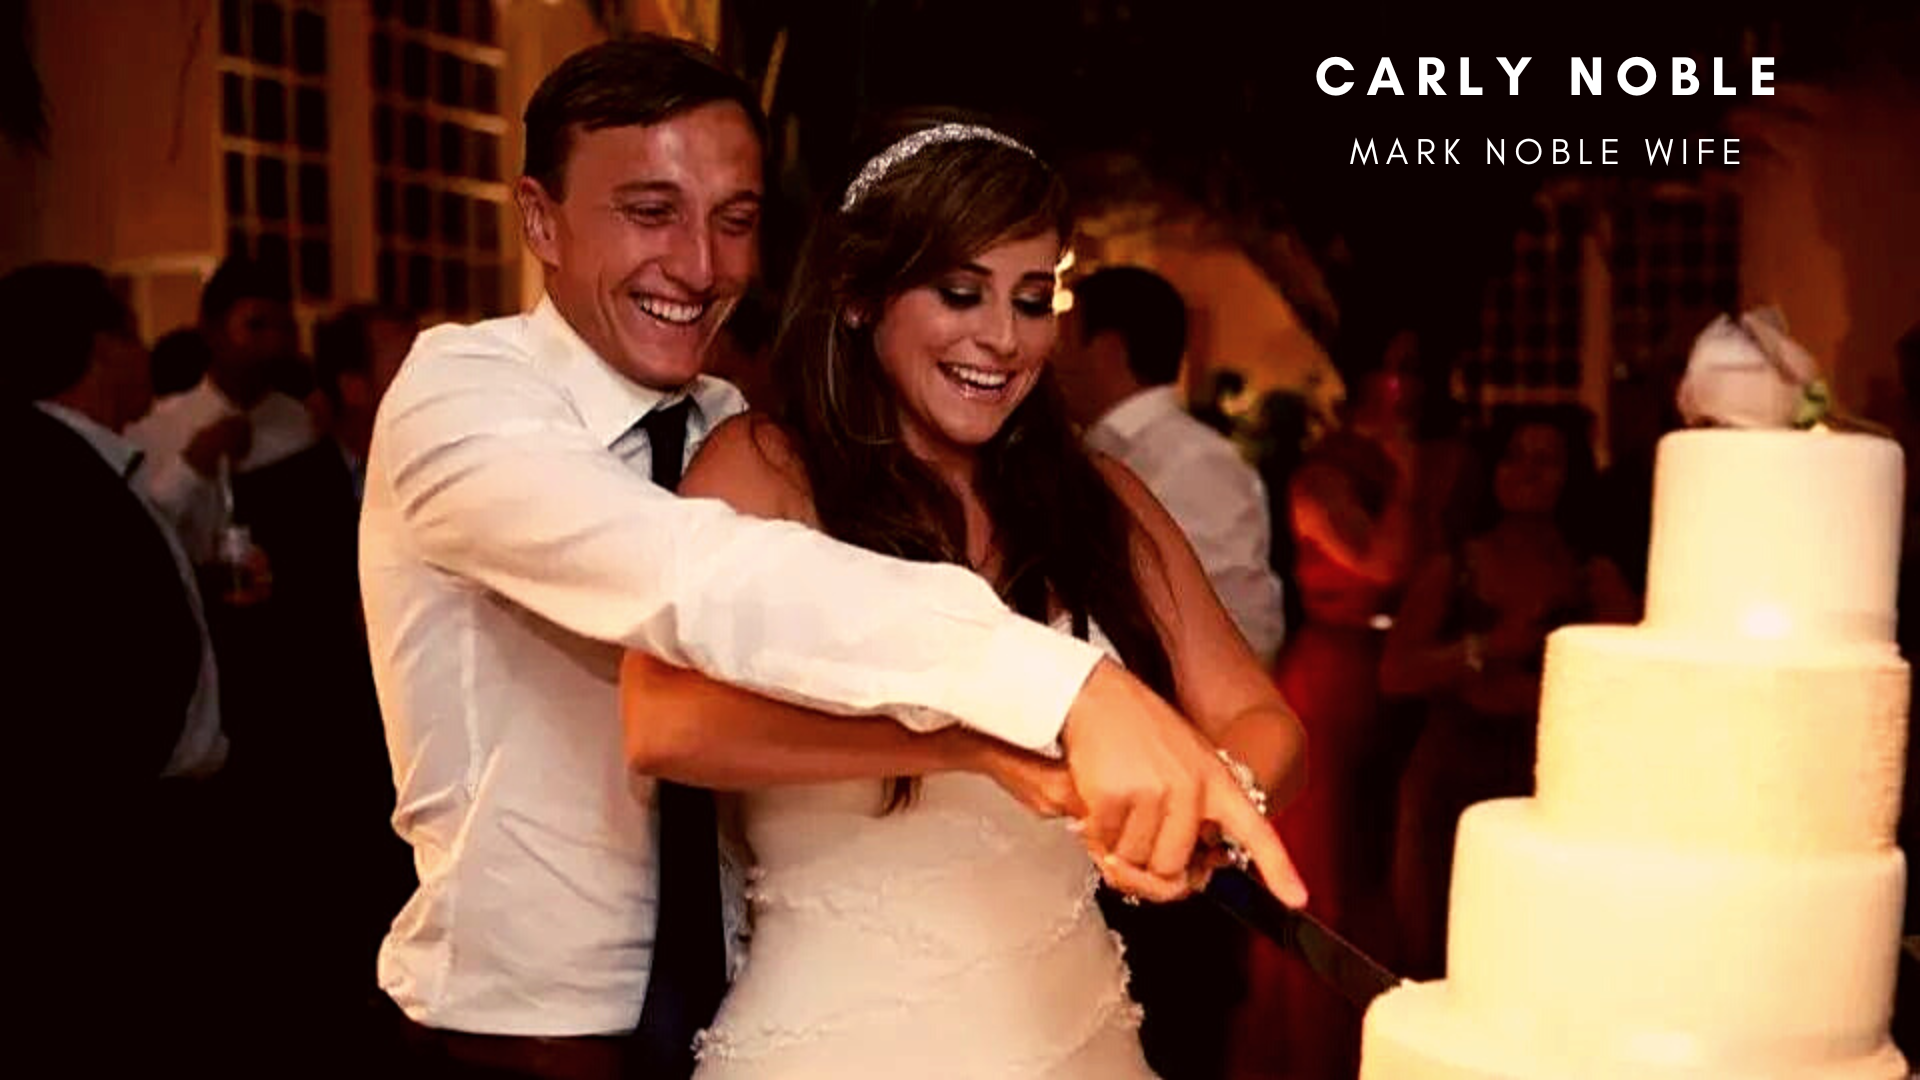 Mark Noble with his wife Carly Noble. (Credit: Oh My Football)